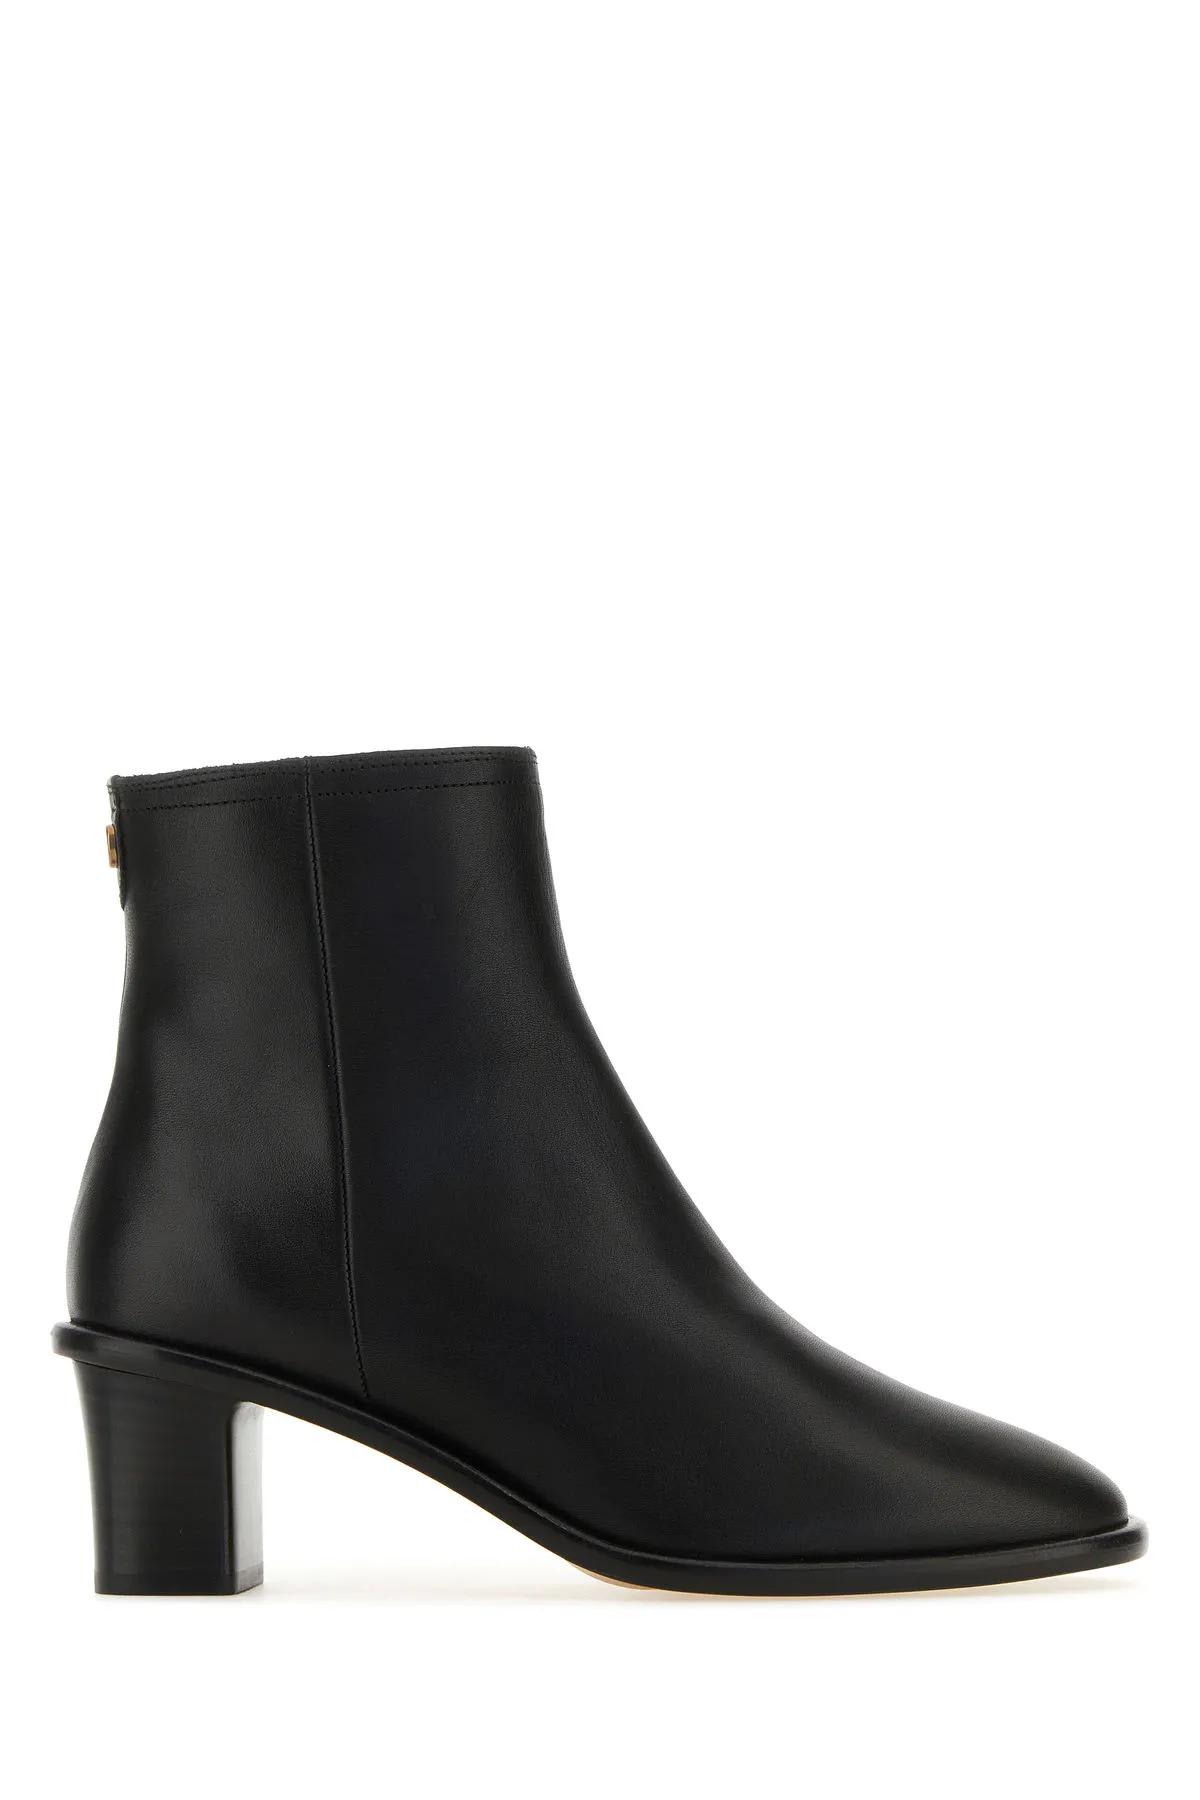 ISABEL MARANT BLACK LEATHER ANKLE BOOTS